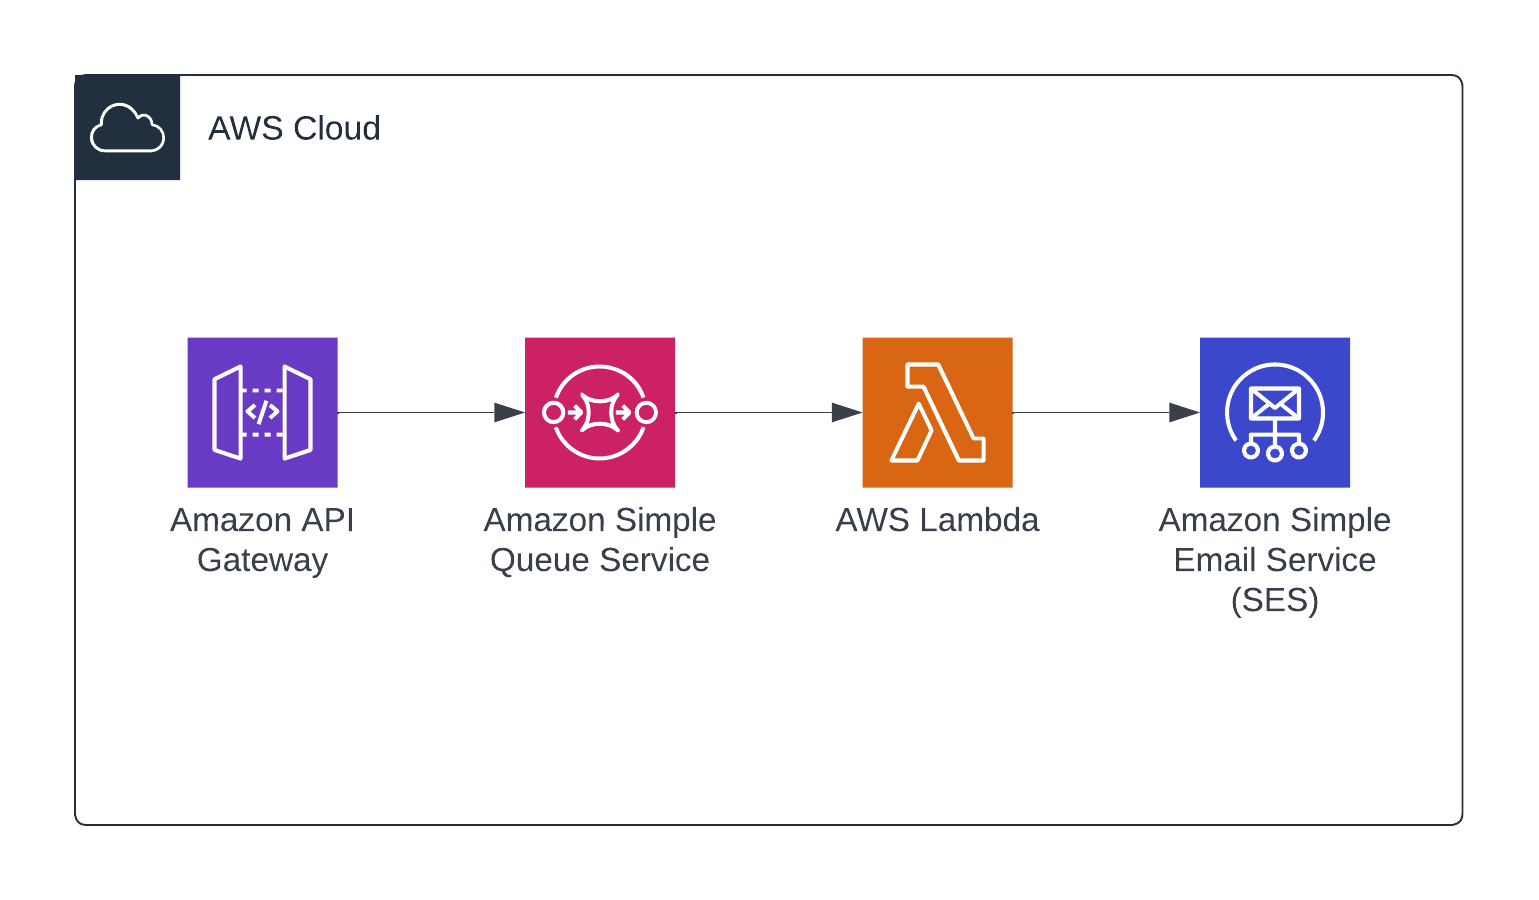 Diagram - serverless email delivery with AWS API Gateway, SQS, Lambda and SES